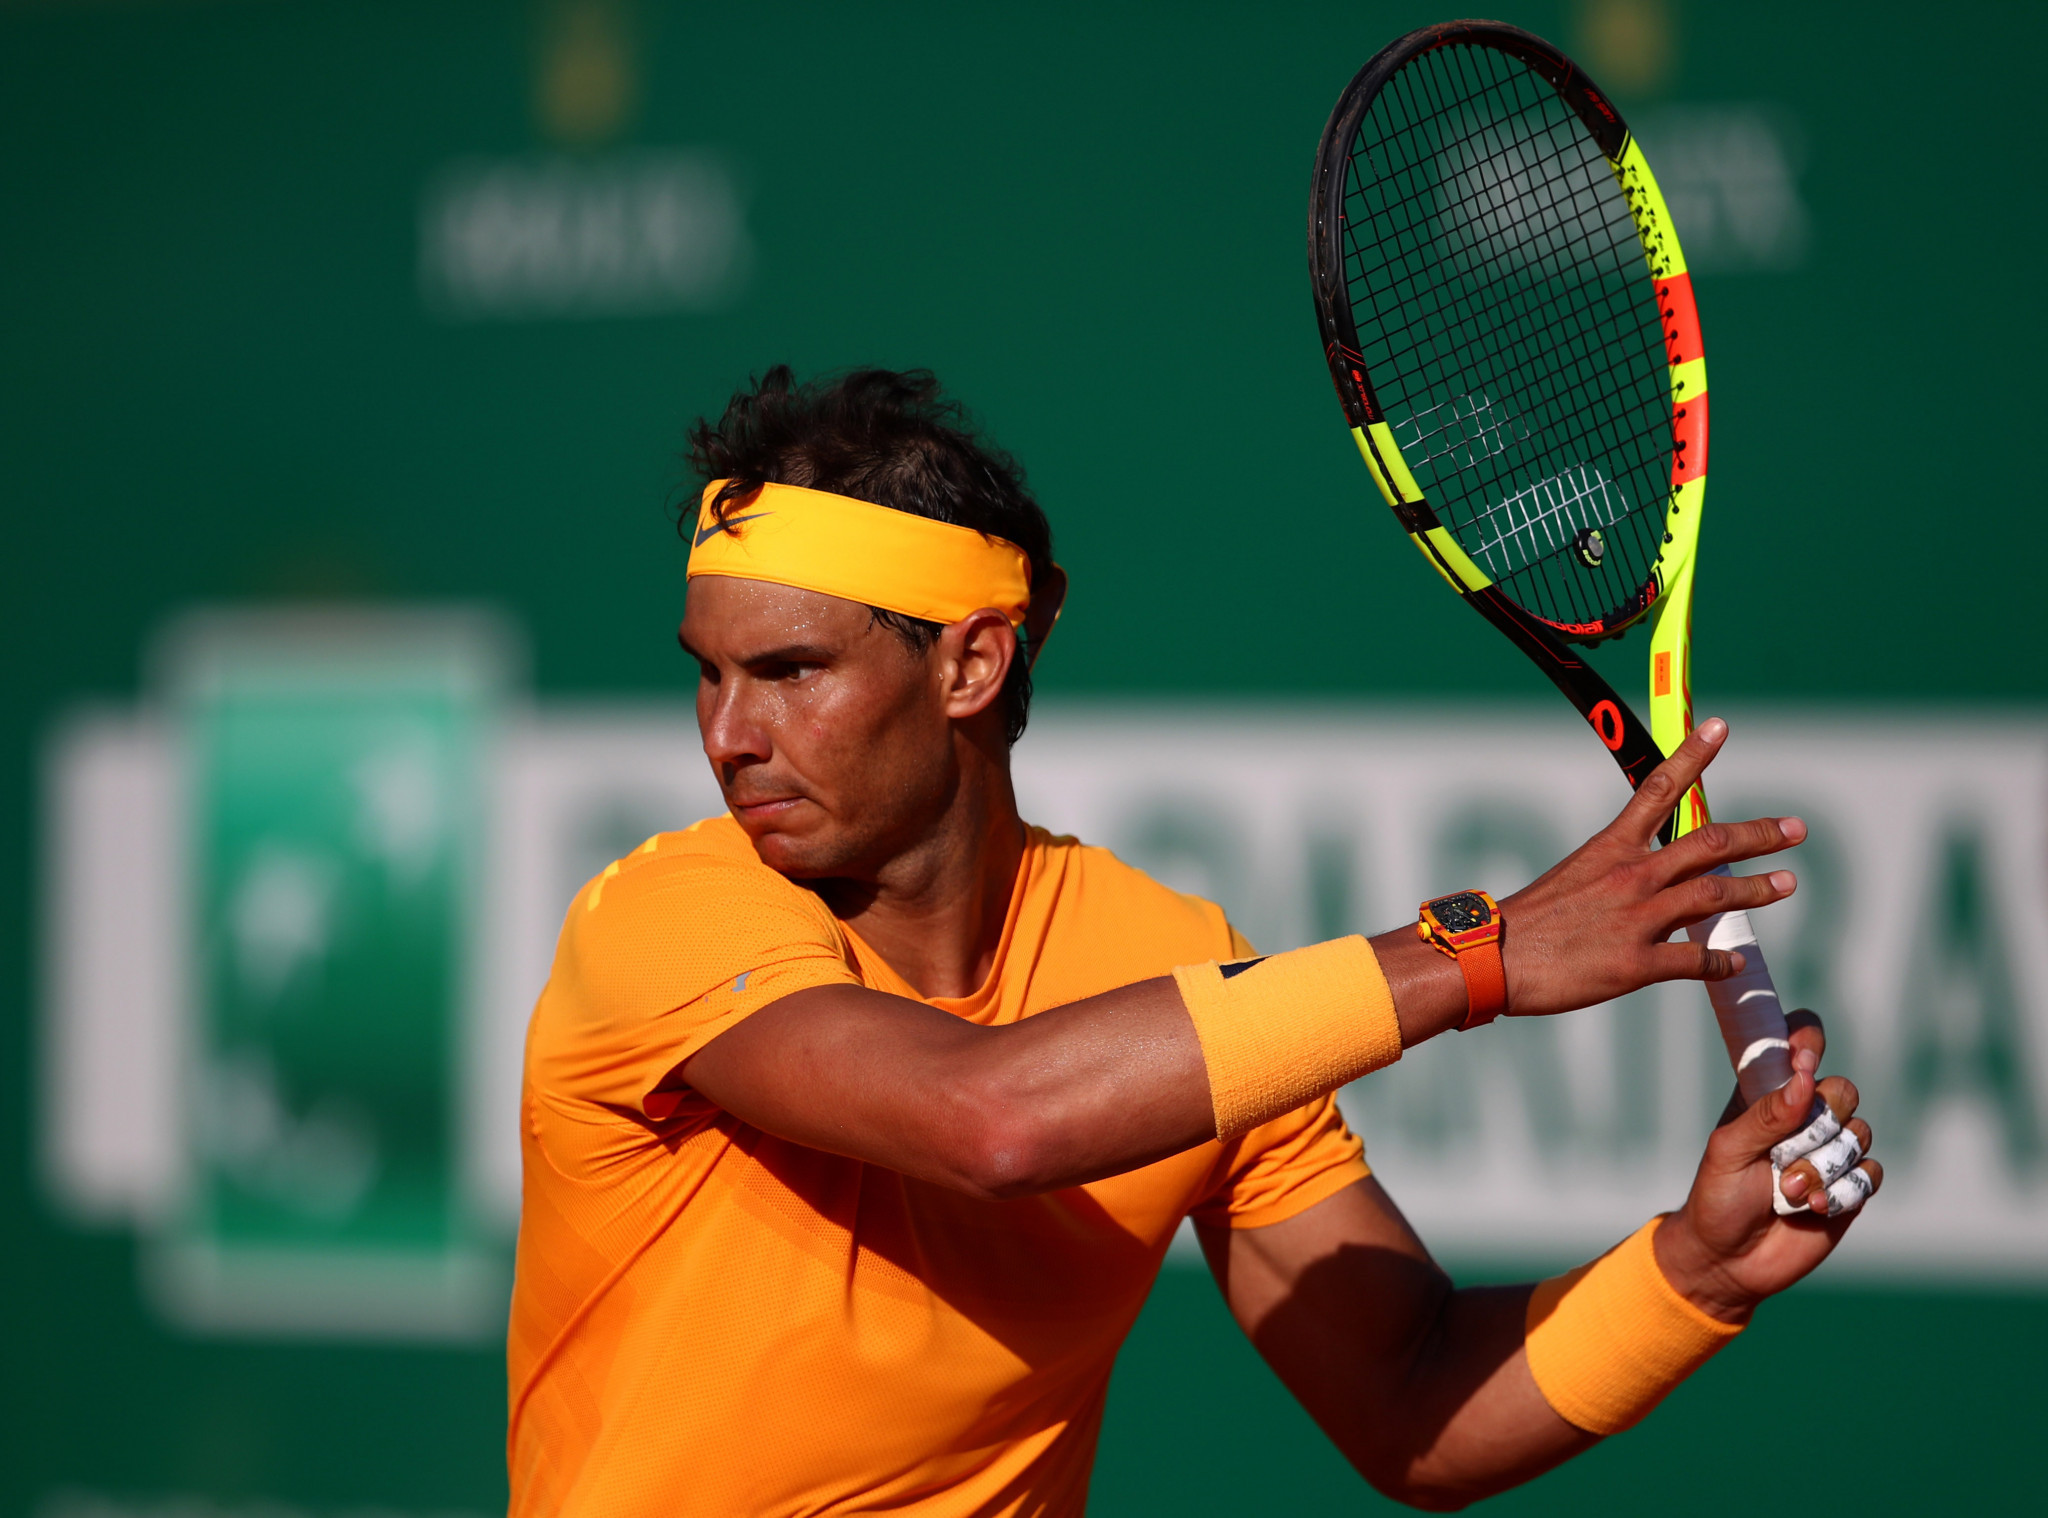  Nadal still heading for 11th Monte Carlo win, but Djokovic makes an early exit